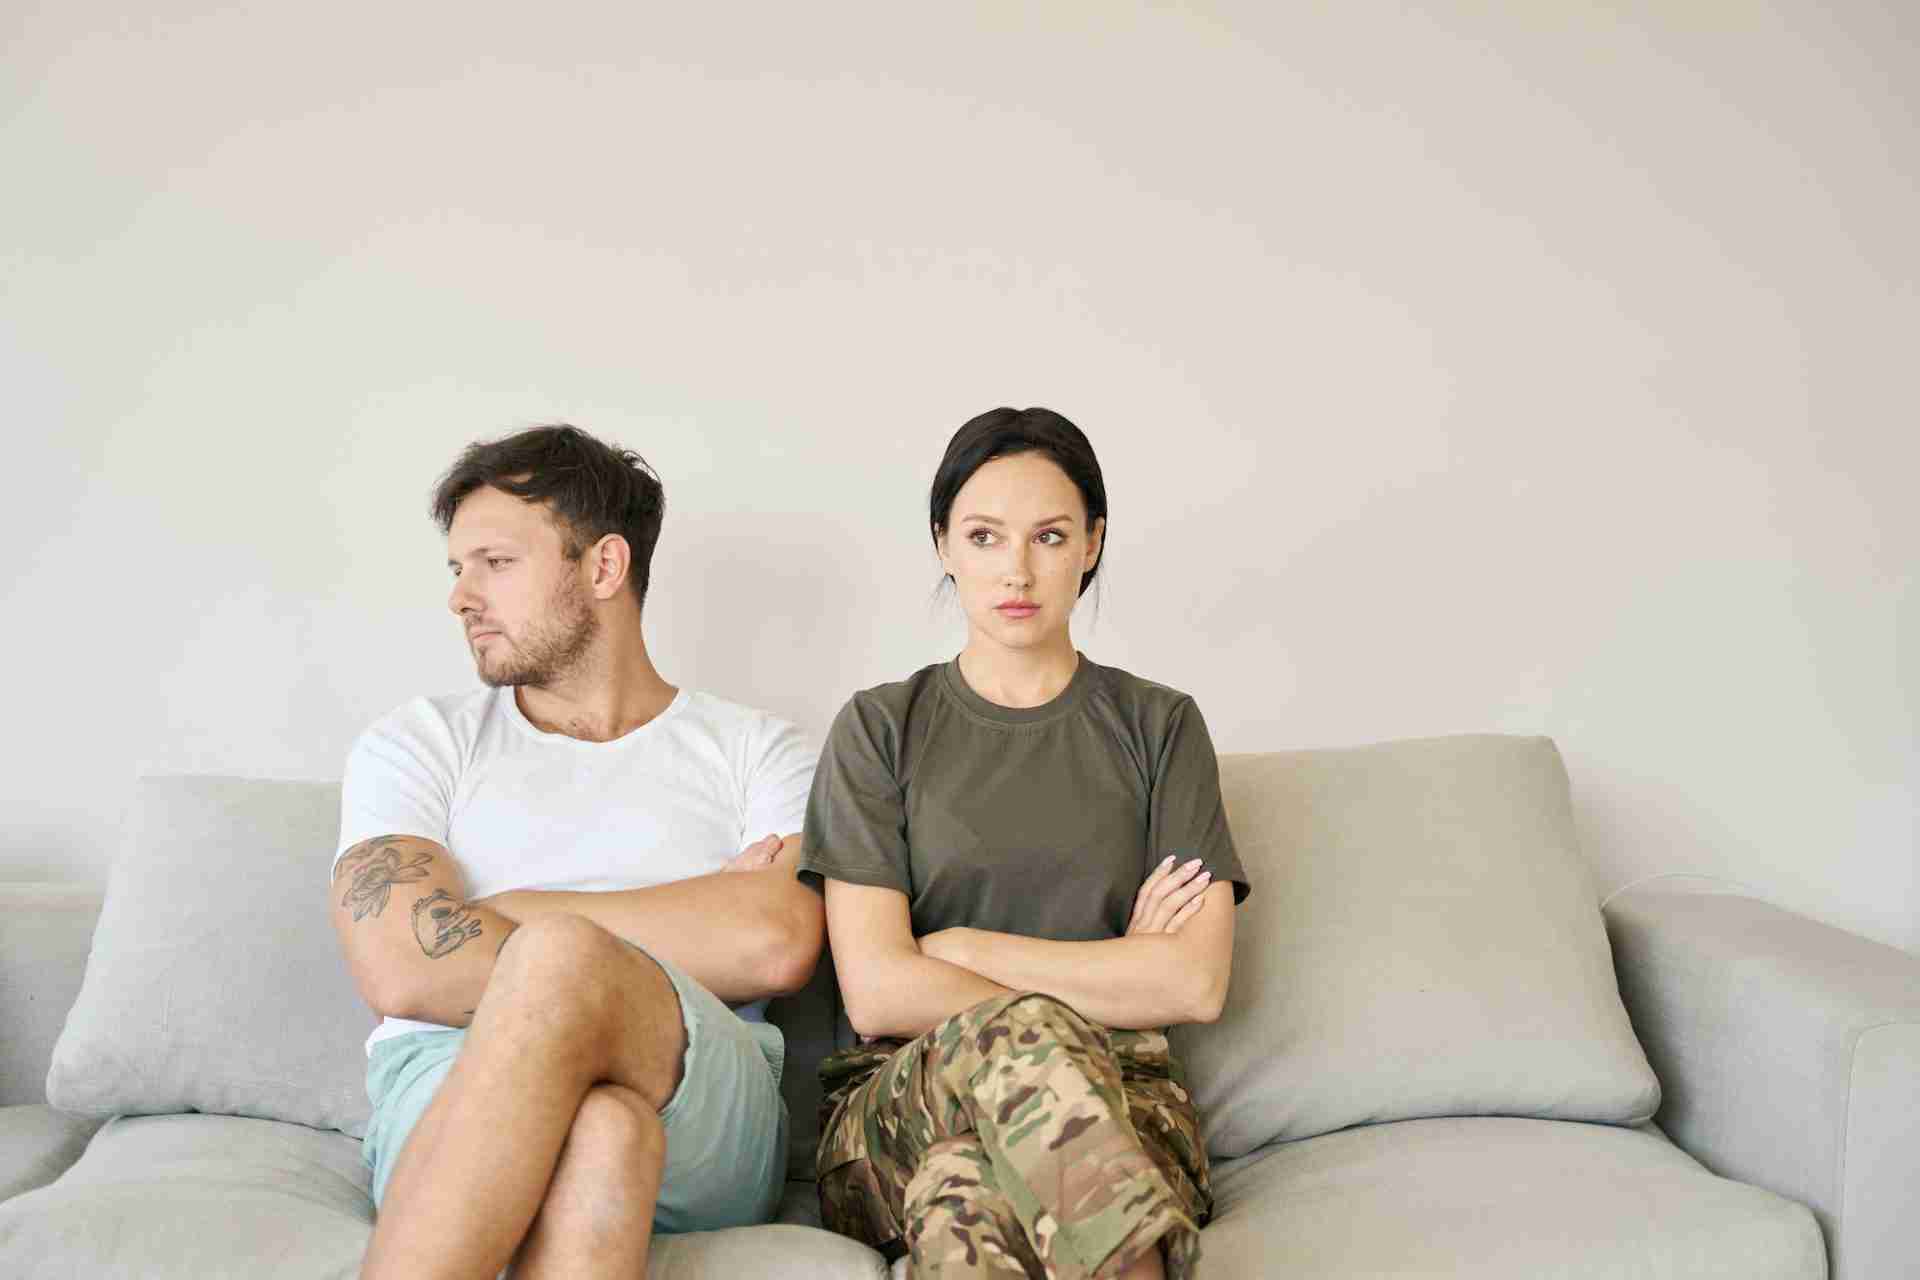 Conflicting Couple Sitting On Sofa In Closed Poses